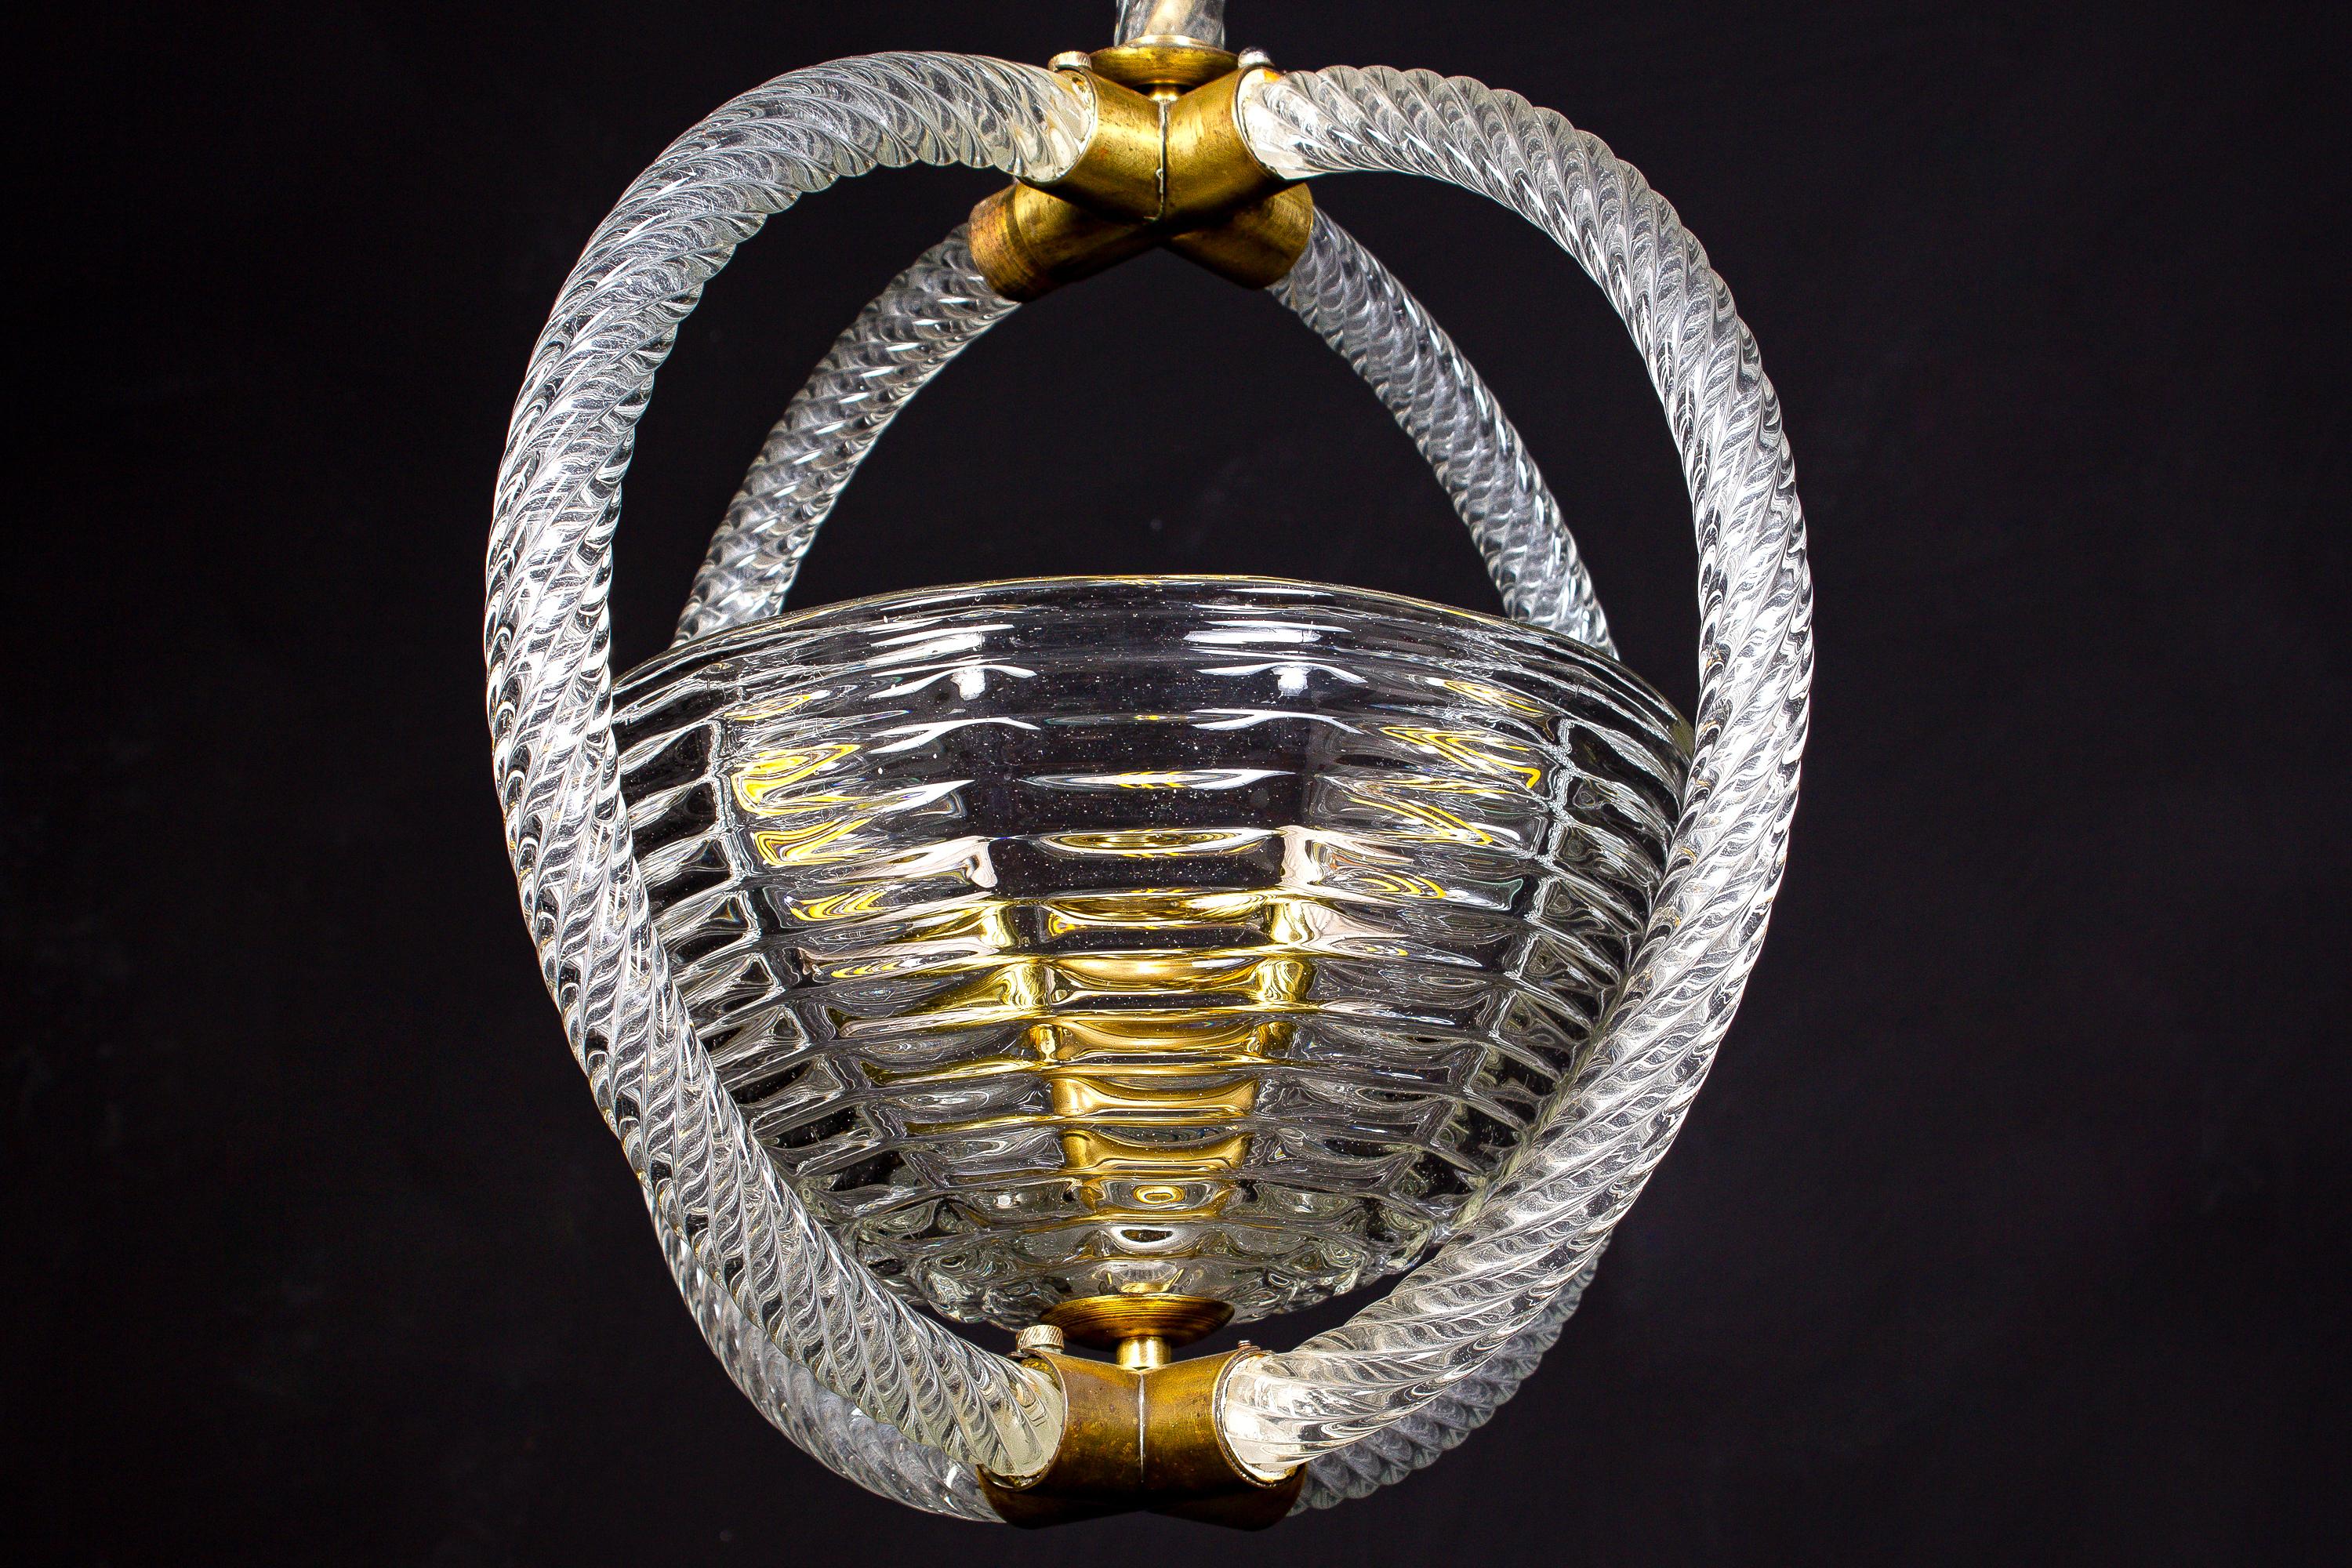 Elegant Art Deco pendant centered by a precious Murano hand blown glass cup.
Brass-mounted with original warm natural patina. One E27 lamp socket.
The chain can be shortened on request.
Perfect vintage condition.
  